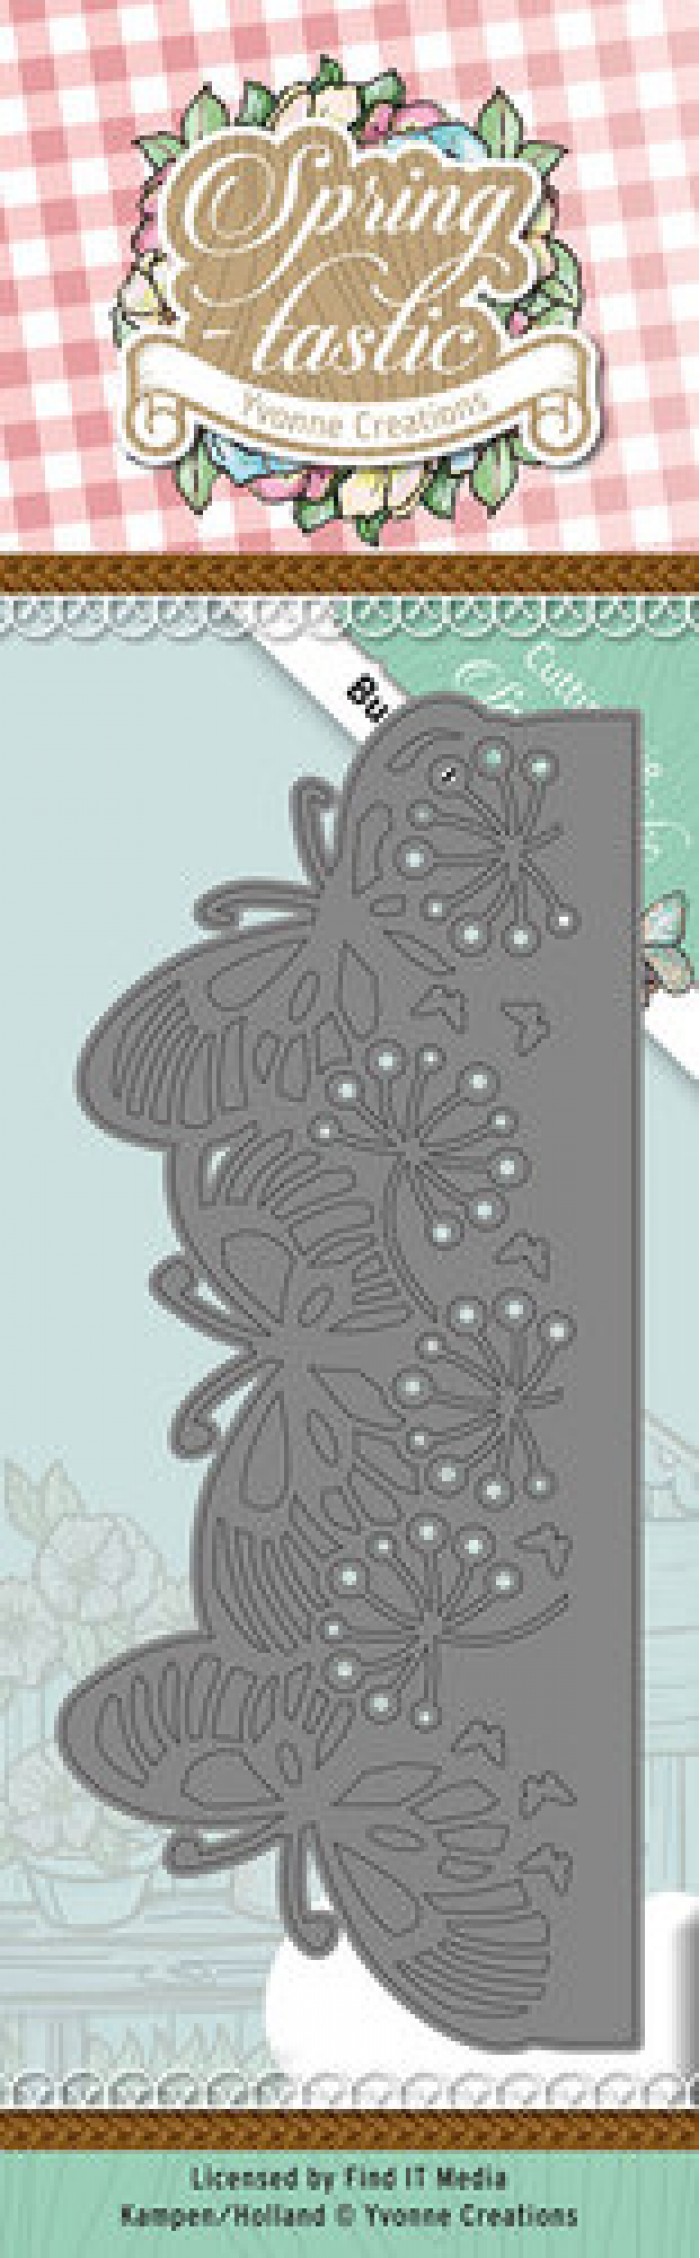 Butterfly Border - Spring-tastic - Snijmal - Yvonne Creations